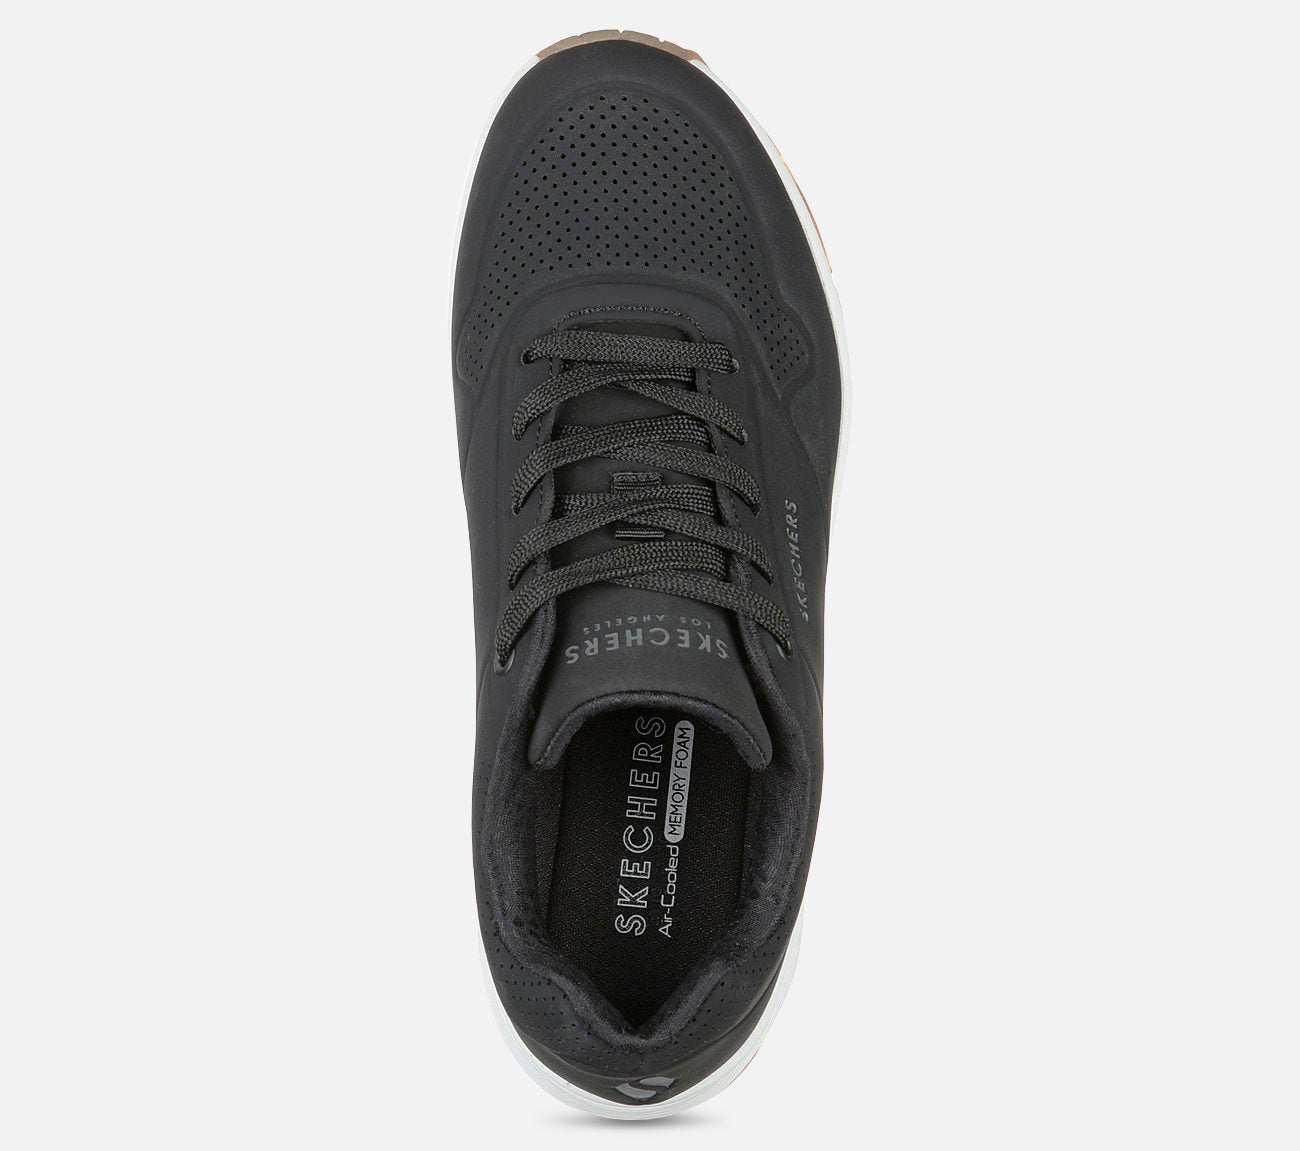 Uno - Stand On Air Shoe Skechers